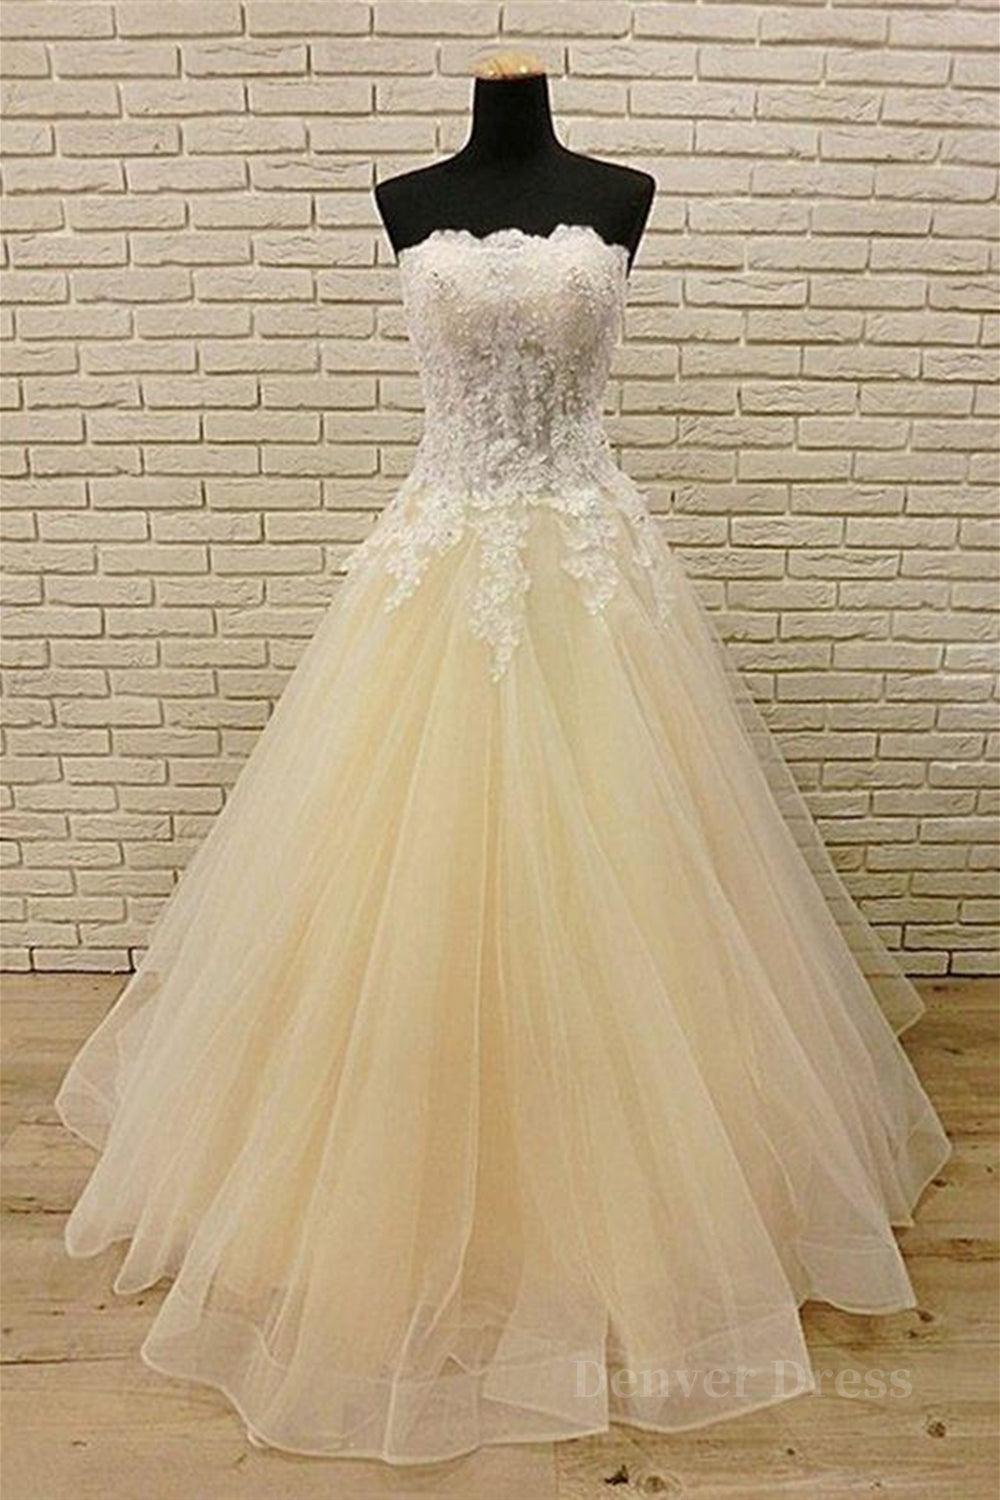 Strapless Champagne Long Prom Dresses with Lace Appliques, Champagne Lace Formal Evening Dresses